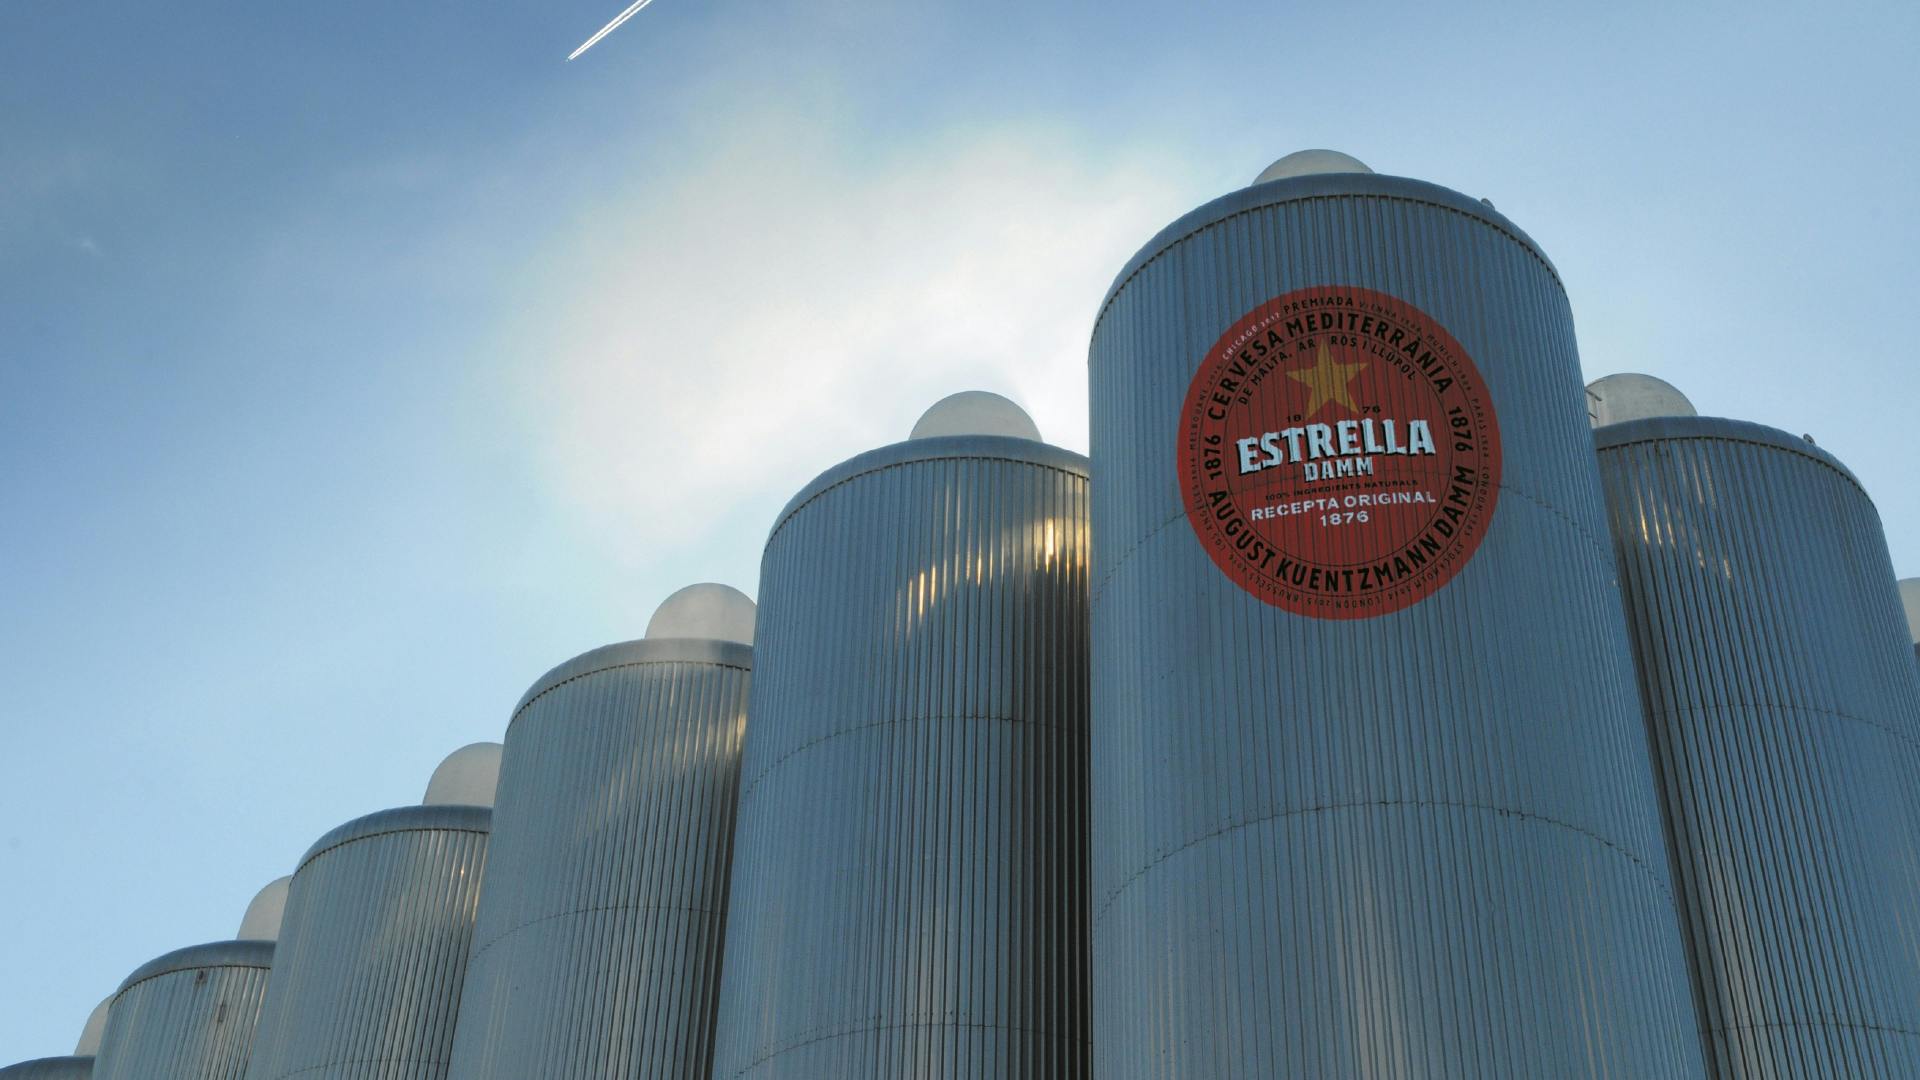 Estrella Damm brewery guided tour with tasting